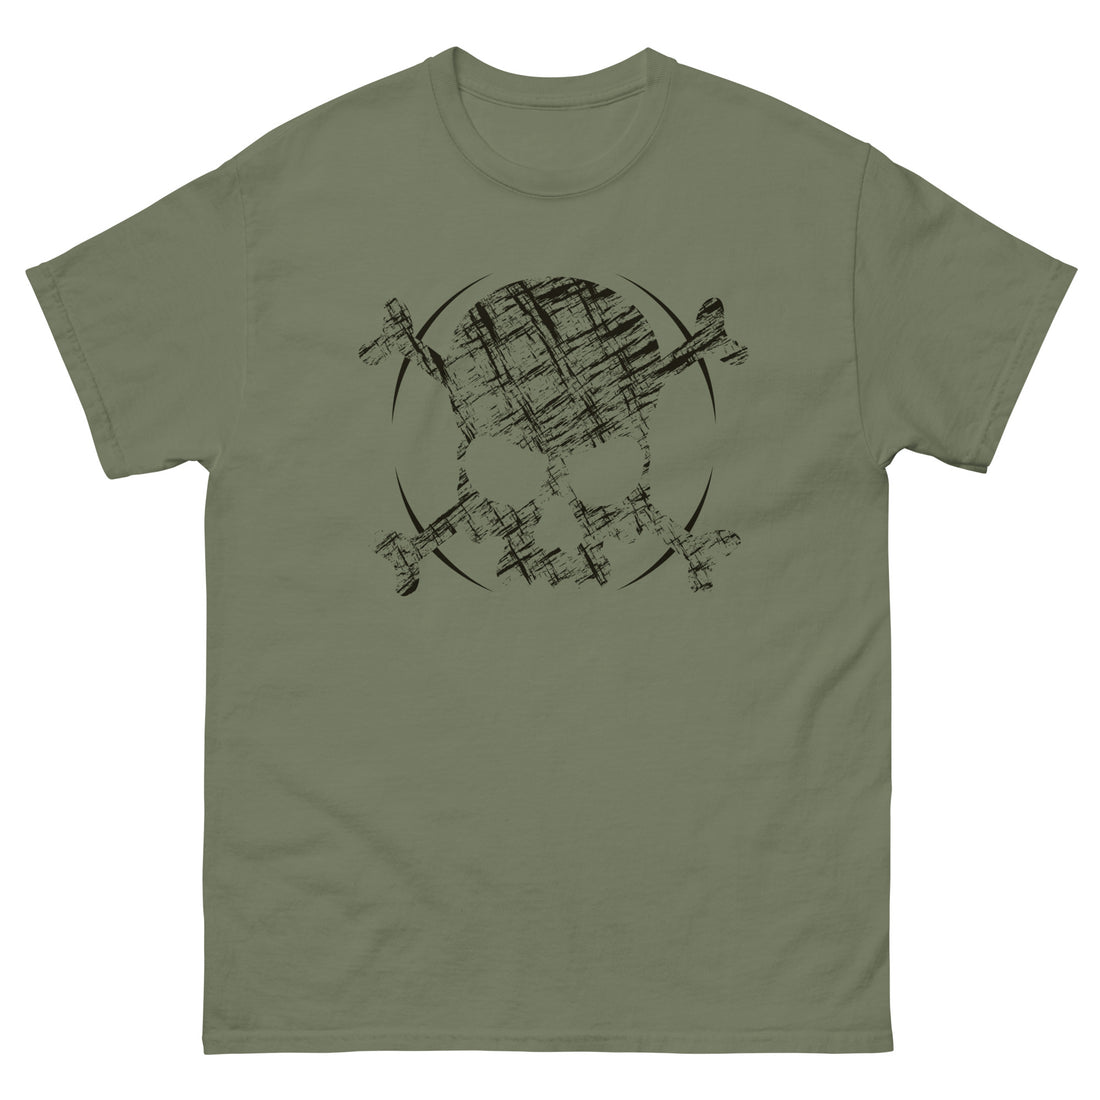 A military green t-shirt adorned with a roughly cross-hatched skull and crossbones in black.  Solid black arcs give the image the impression of movement towards the end of the crossbones.